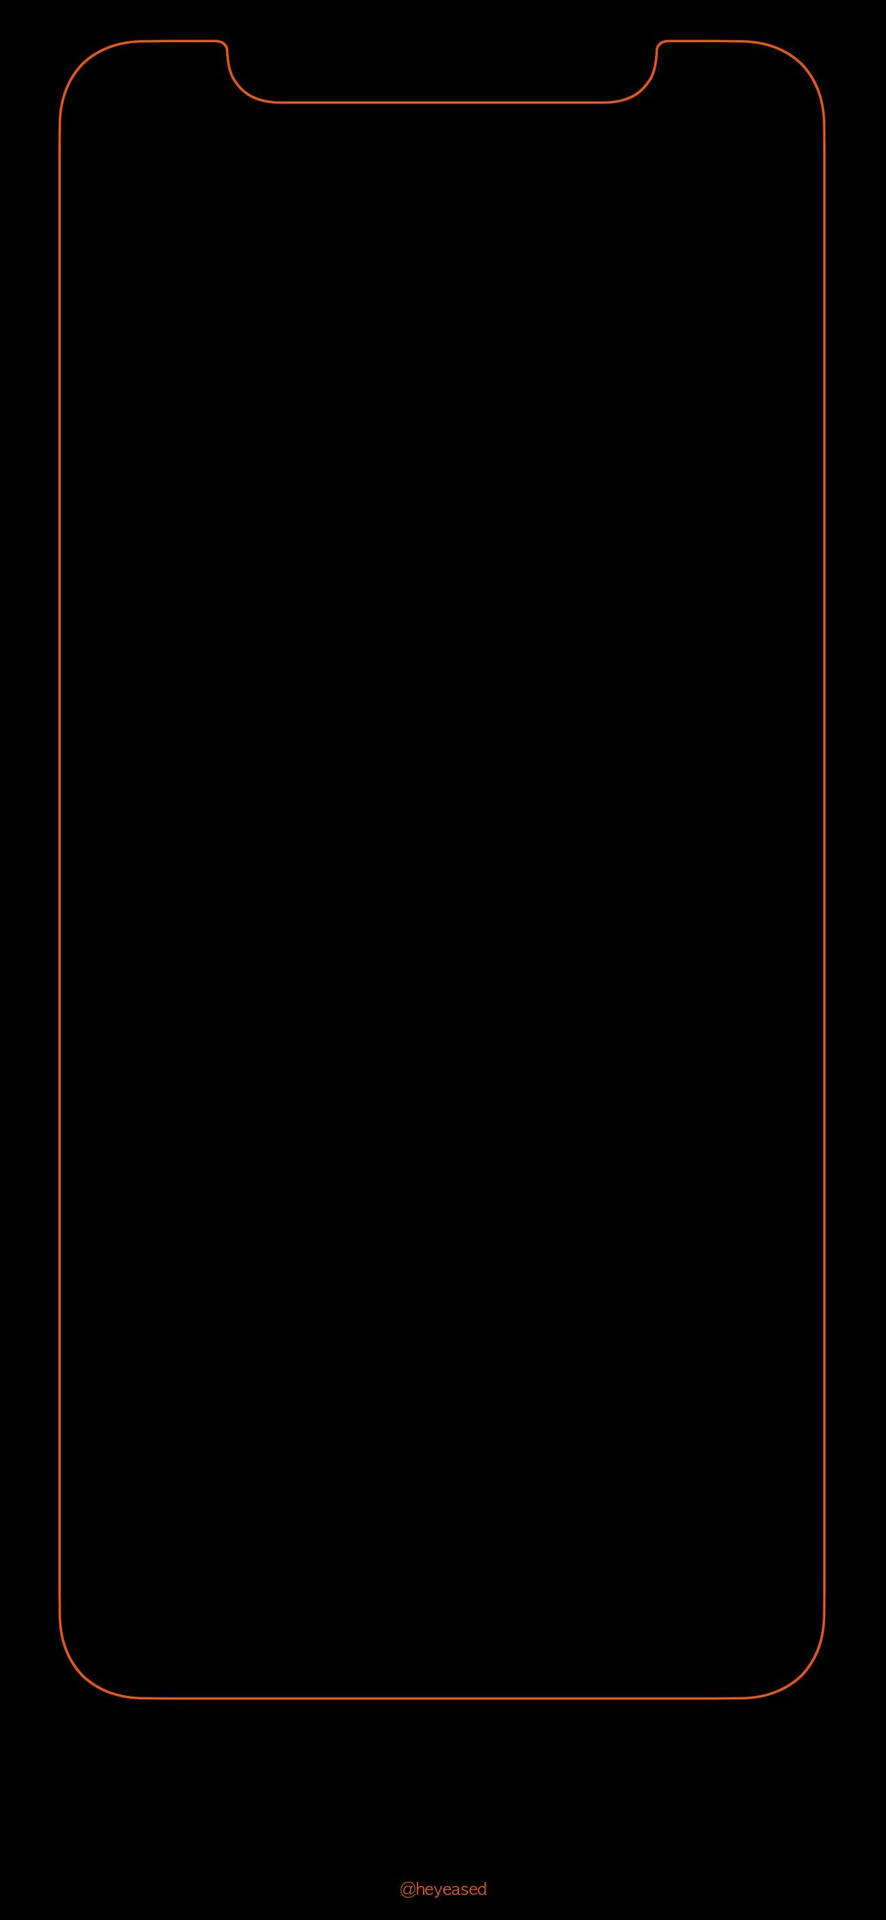 Phone Screen Line Graphic Pitch Black Wallpaper